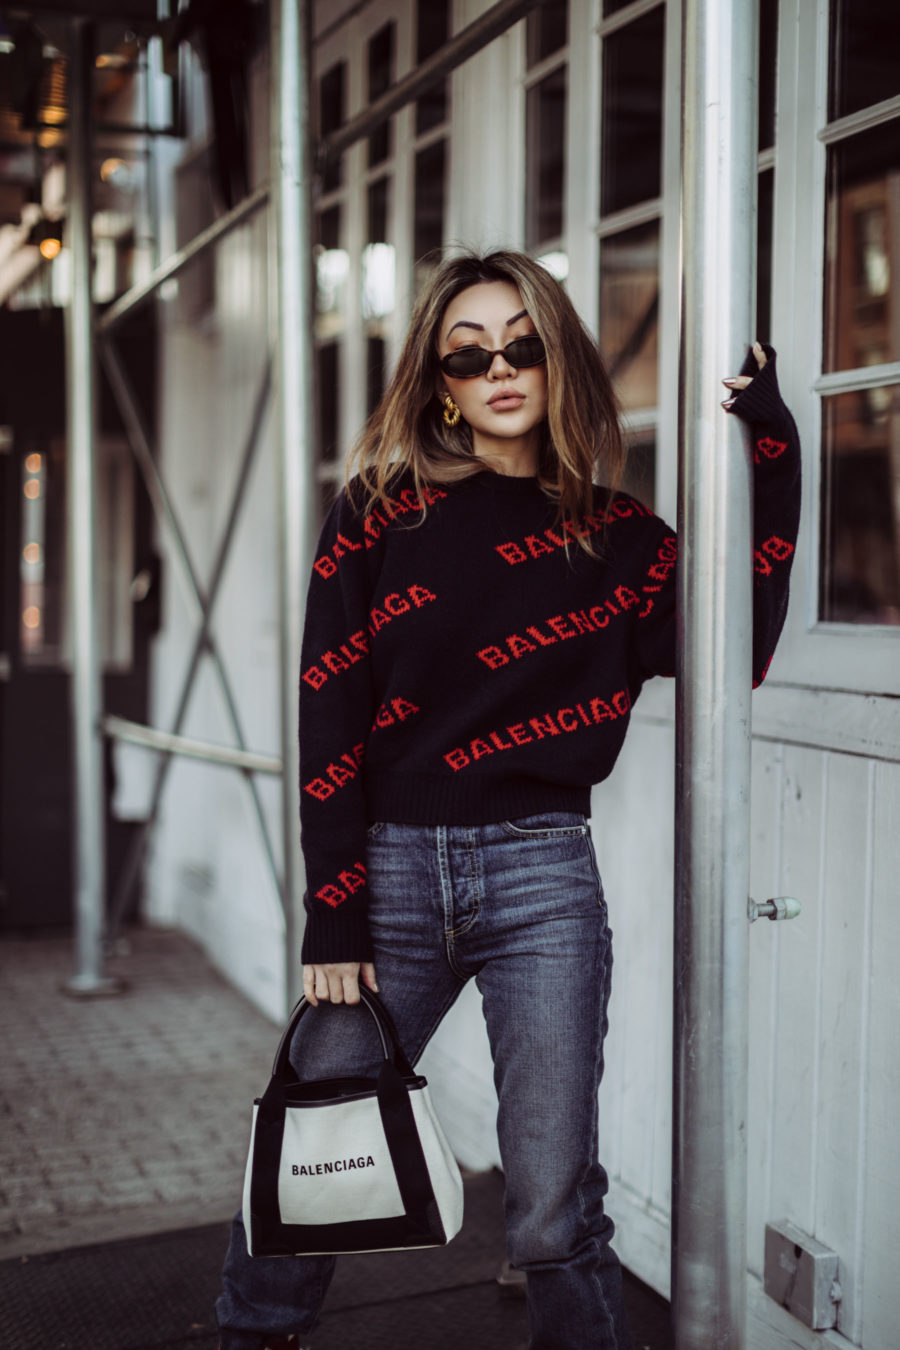 Best outfits for in-between weather - Balenciaga Logo Sweater, Balenciaga Tote, Dakar Boots, sweater and boots outfit // Notjessfashion.com